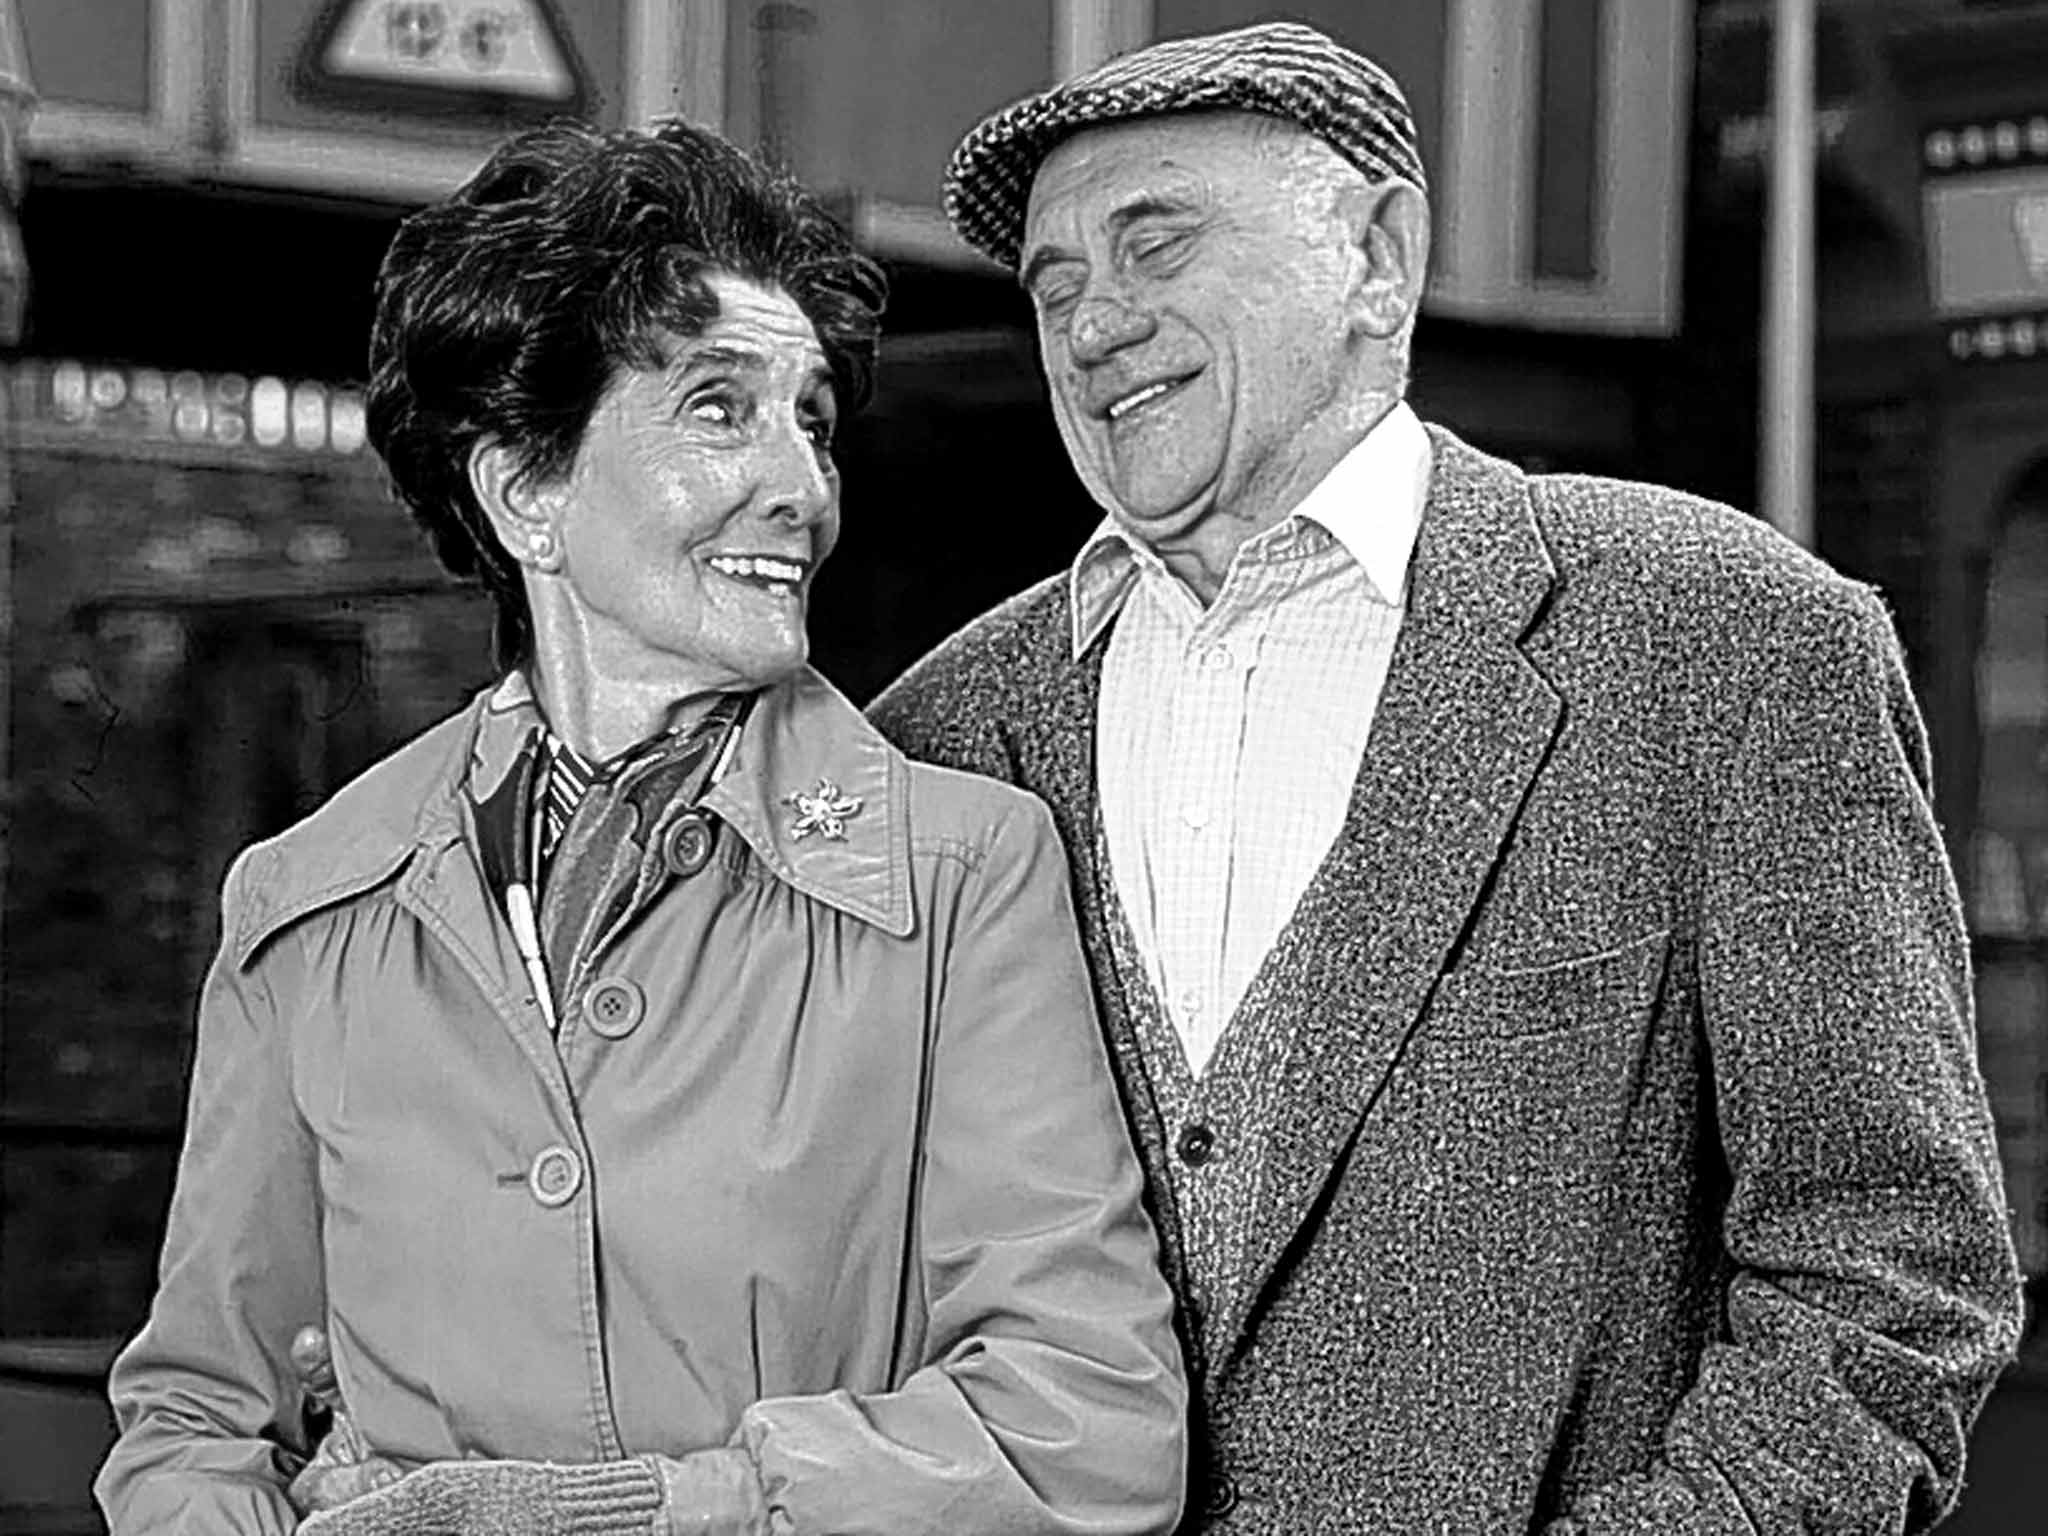 Branning and June Brown in 'EastEnders': his illness was written into the series